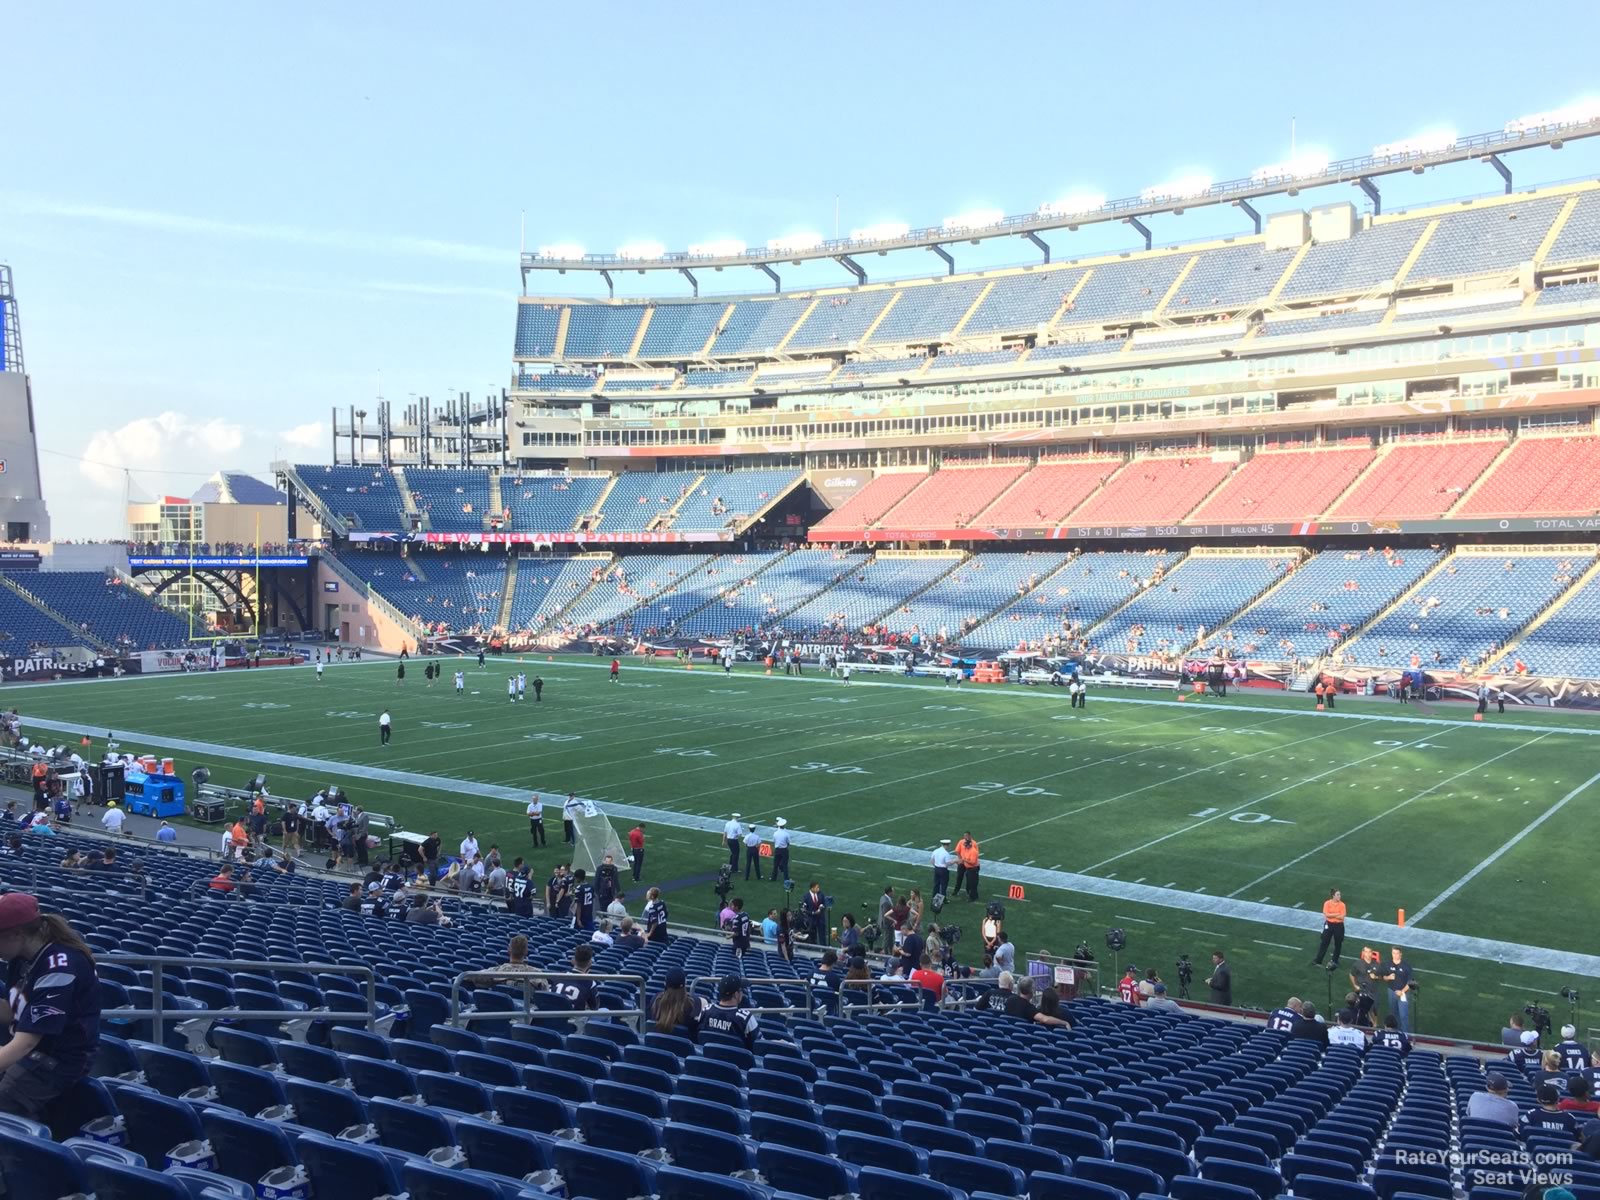 section 127, row 29 seat view  for football - gillette stadium